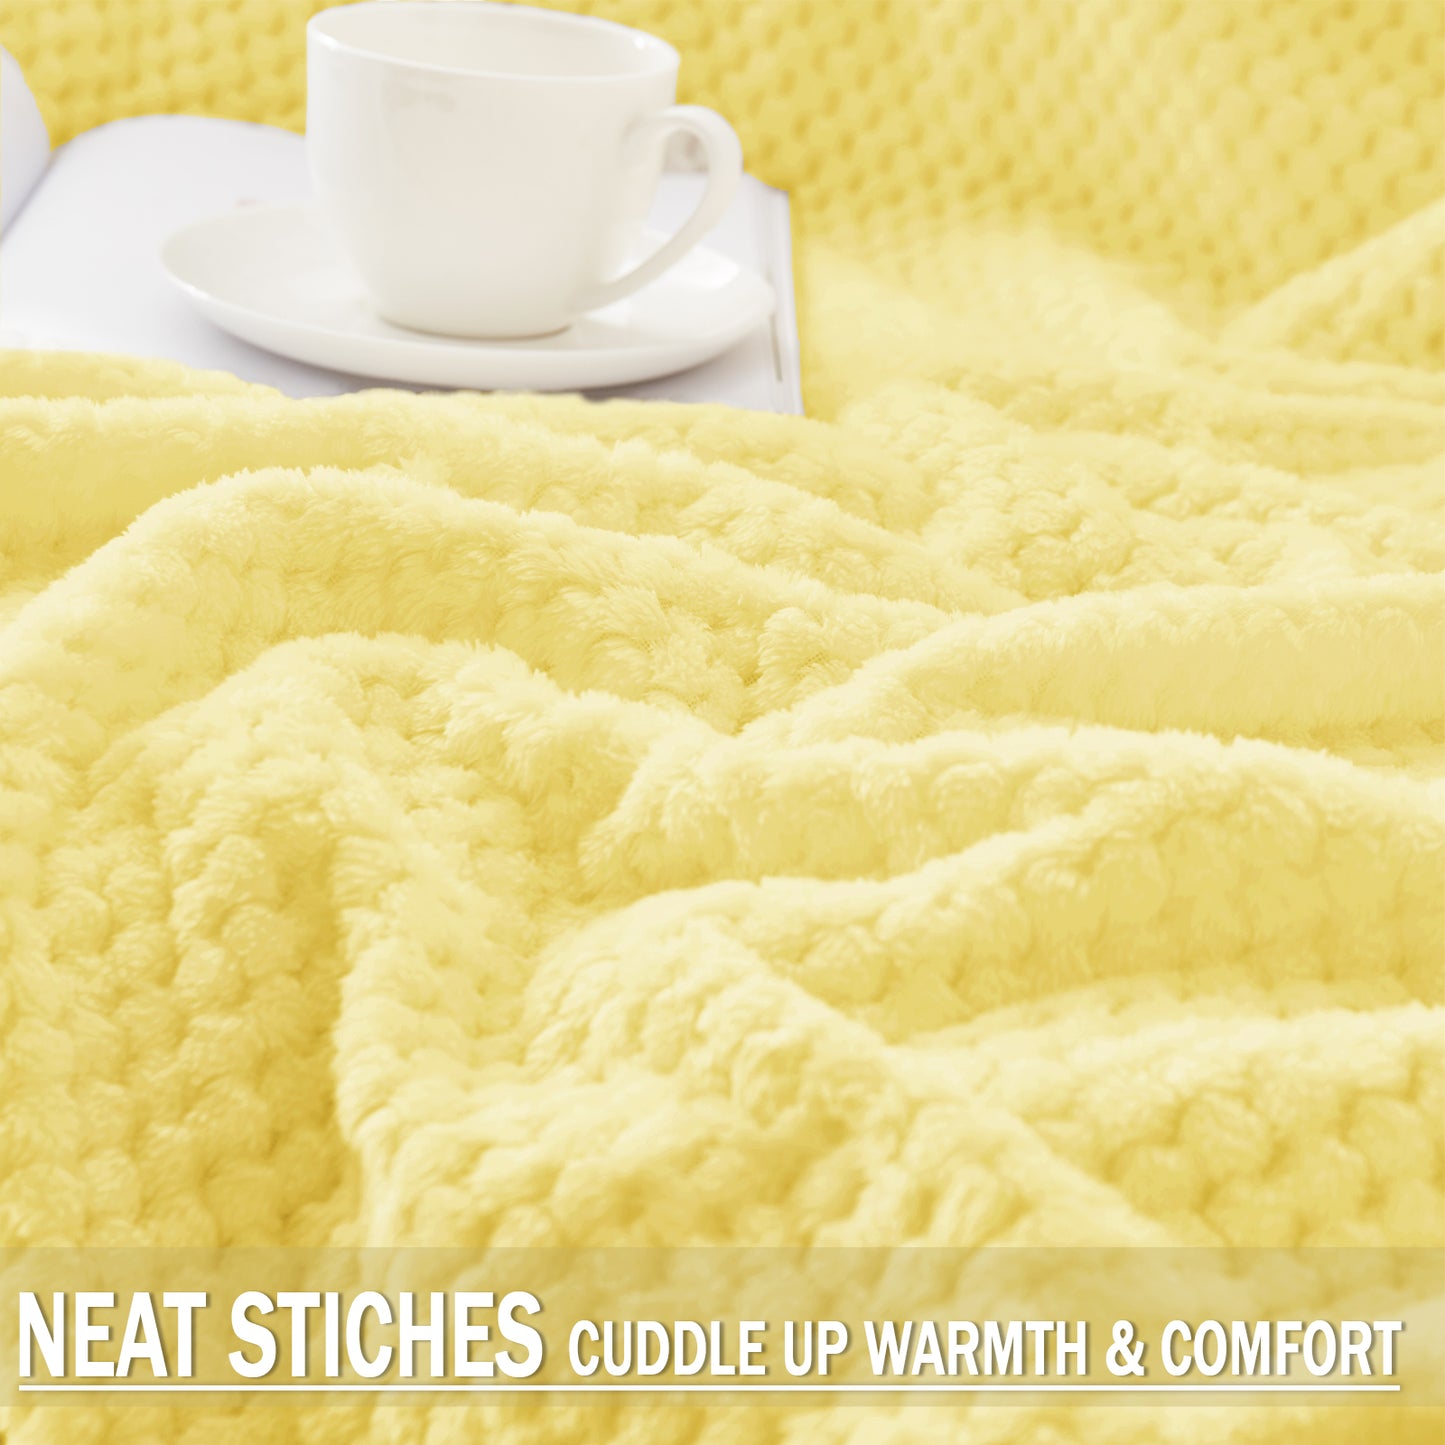 Exclusivo Mezcla Waffle Textured Extra Large Fleece Blanket, Super Soft and Warm Throw Blanket for Couch, Sofa and Bed (Light Yellow, 50x70 inches)-Cozy, Fuzzy and Lightweight